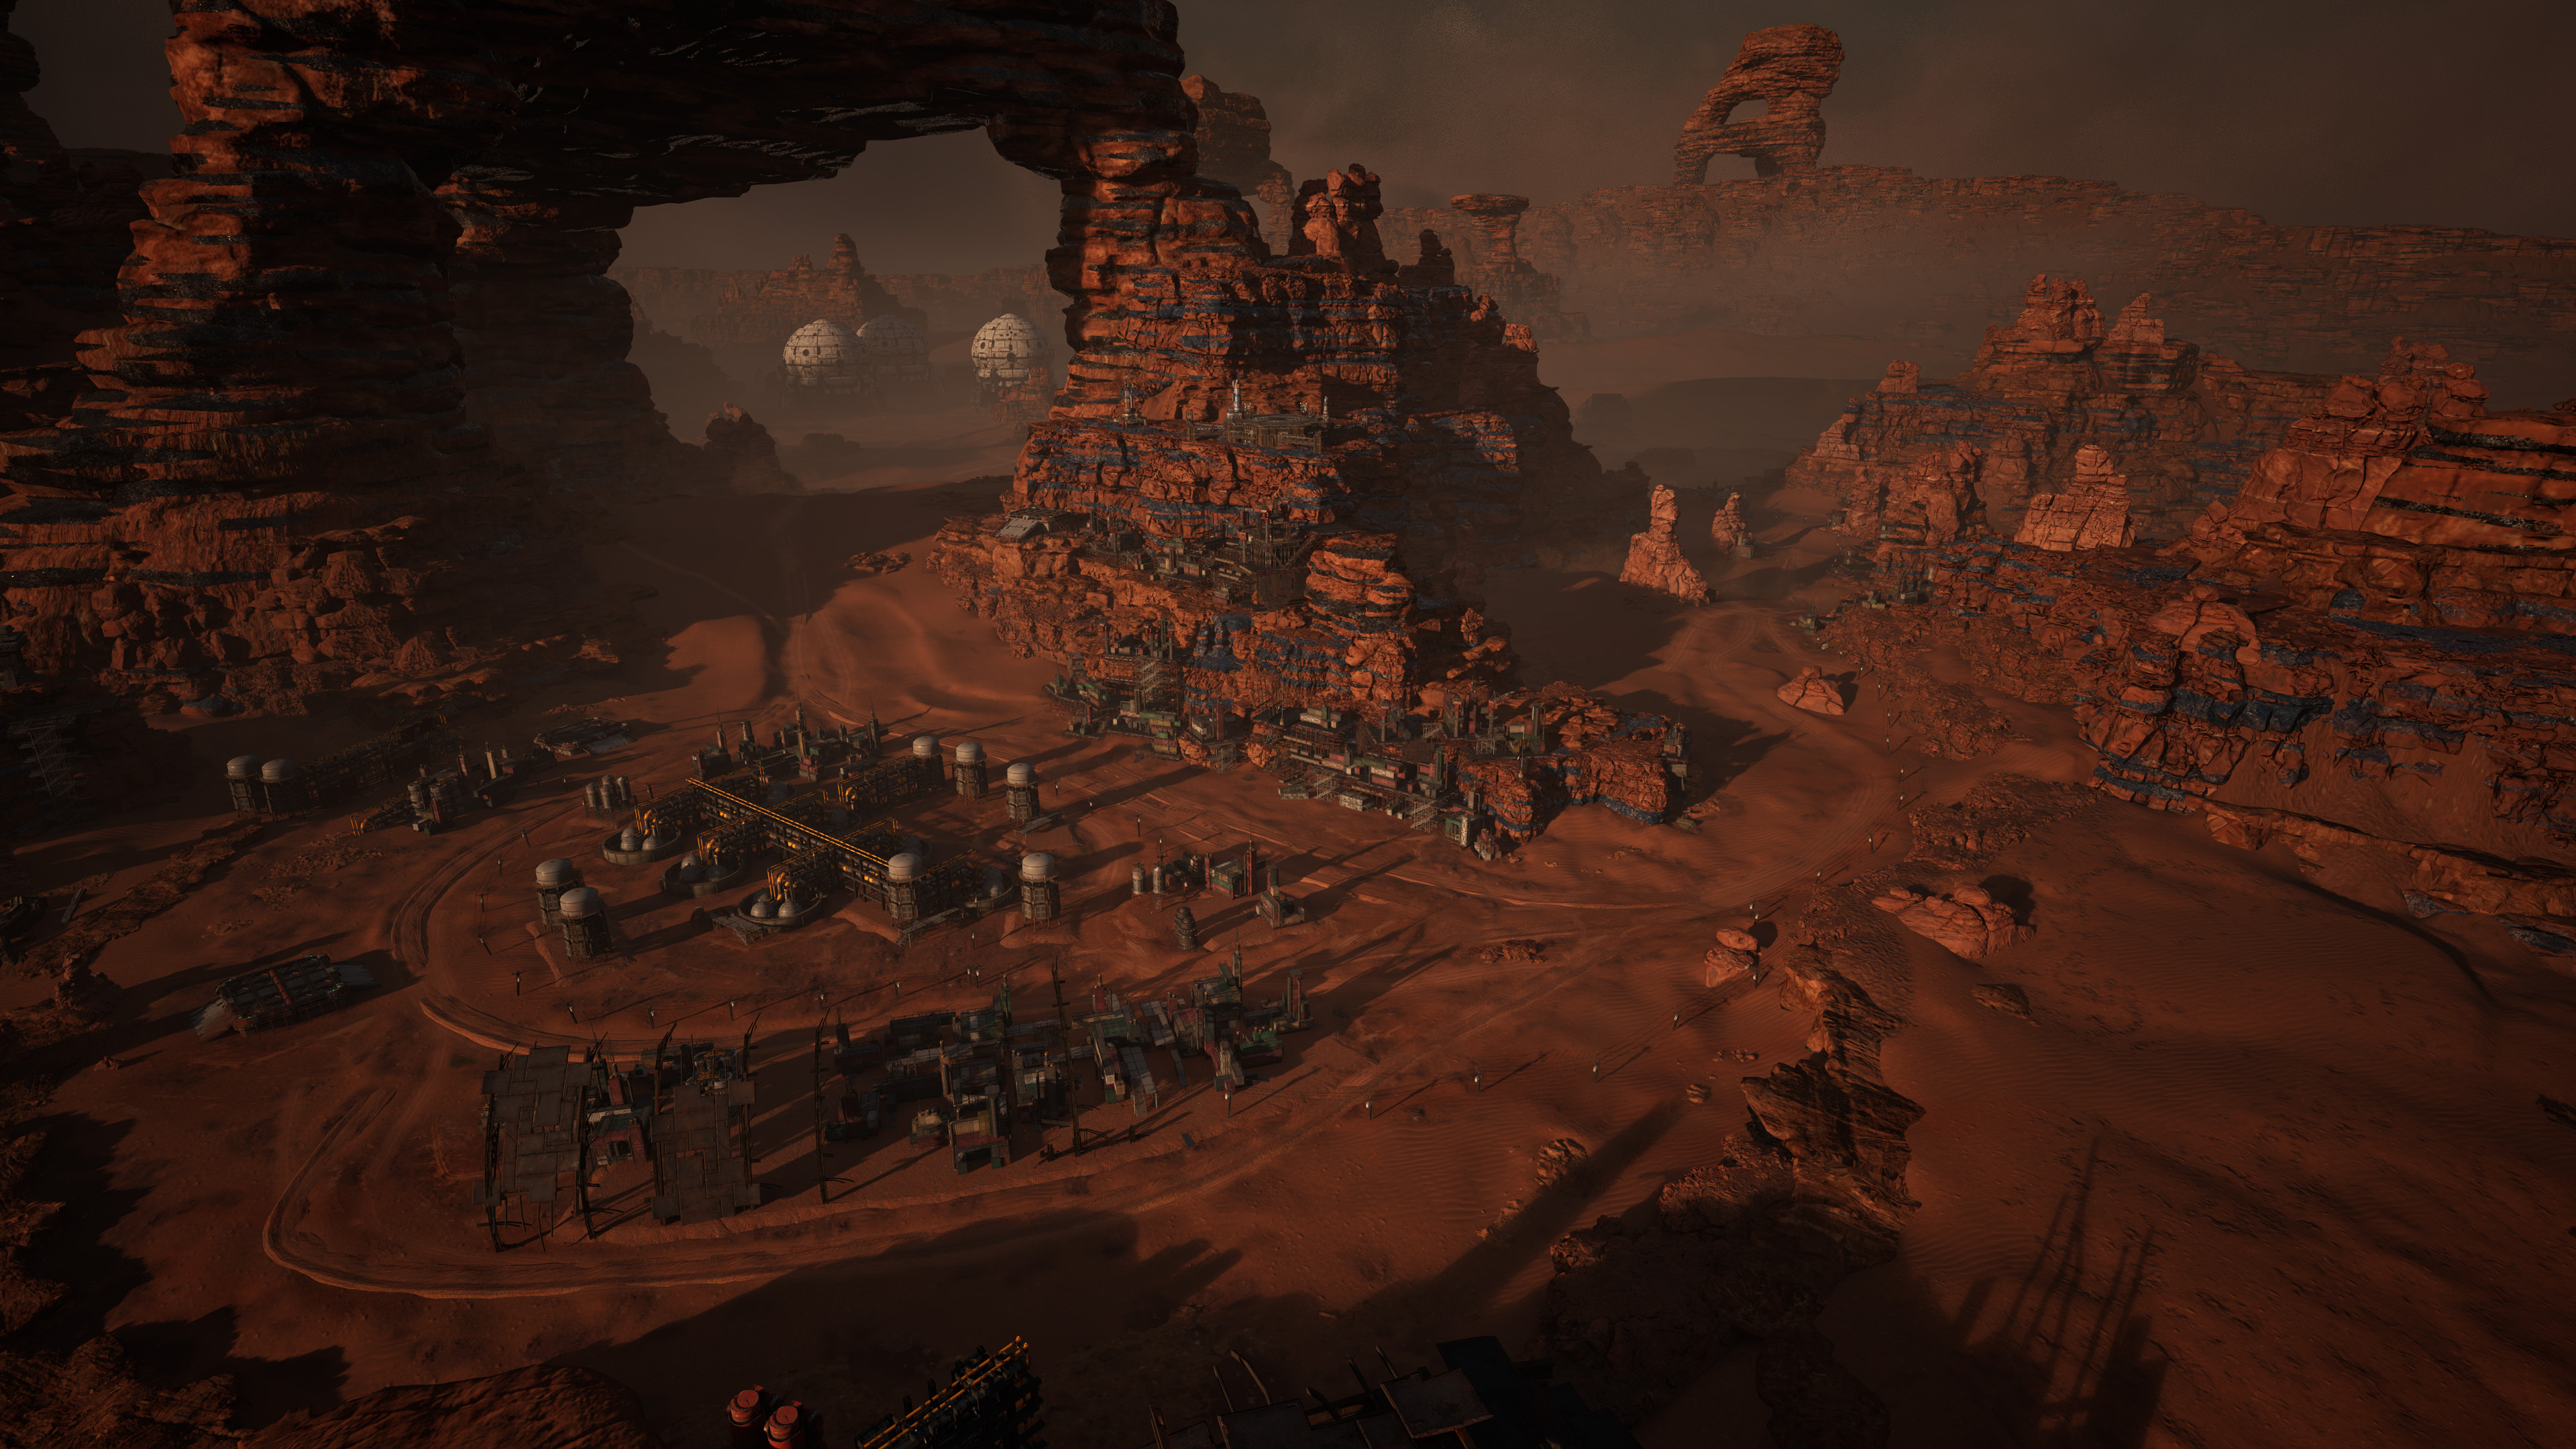 Overview of preview level with base nestled in desert cliffs